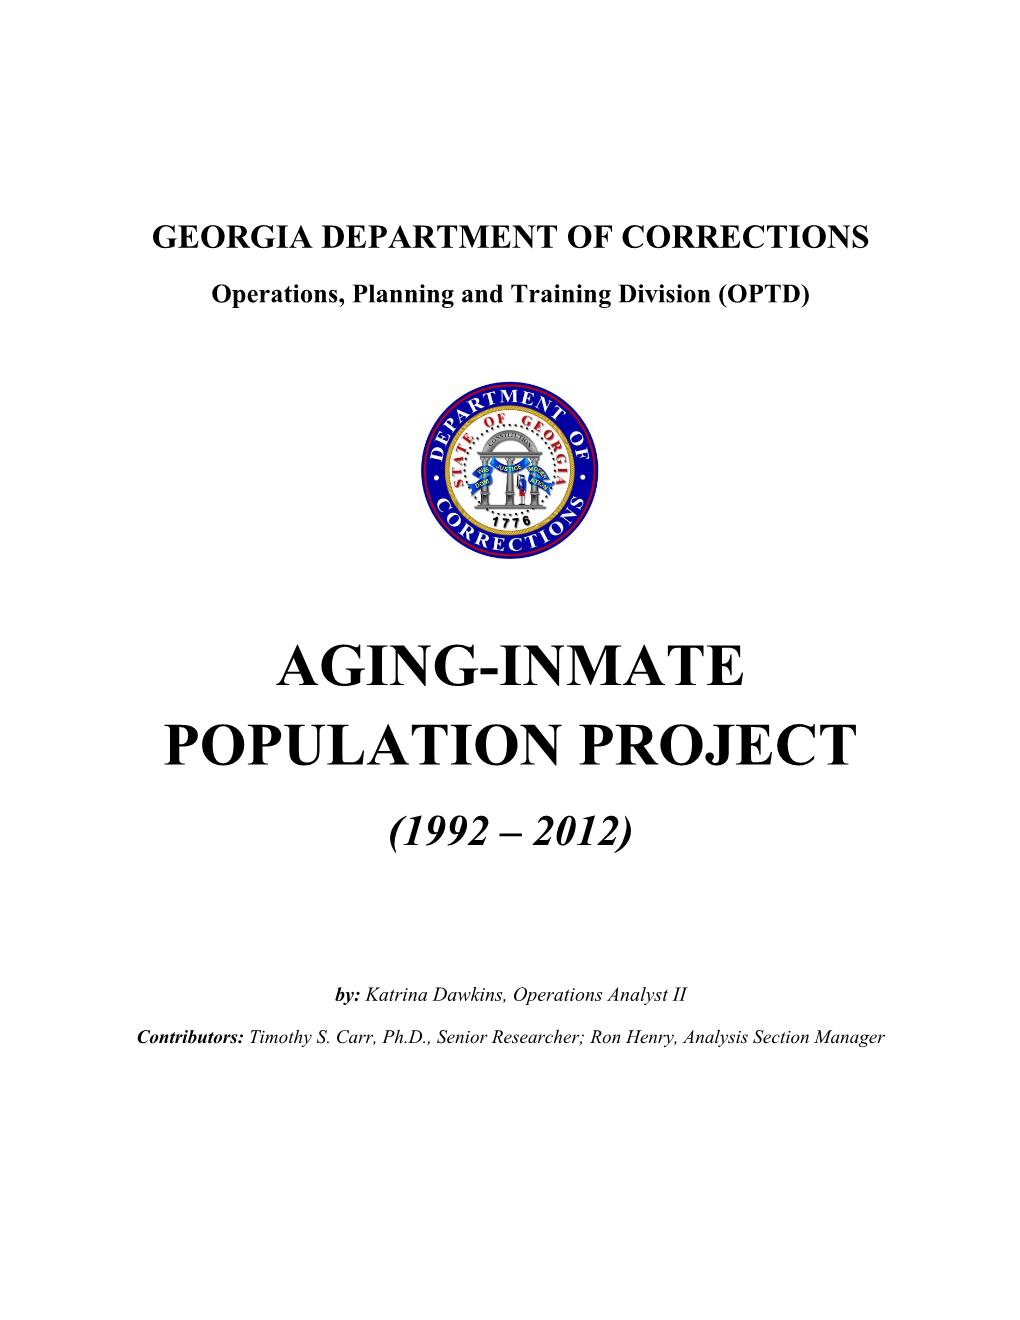 Aging-Inmate Population Project (1992 – 2012)